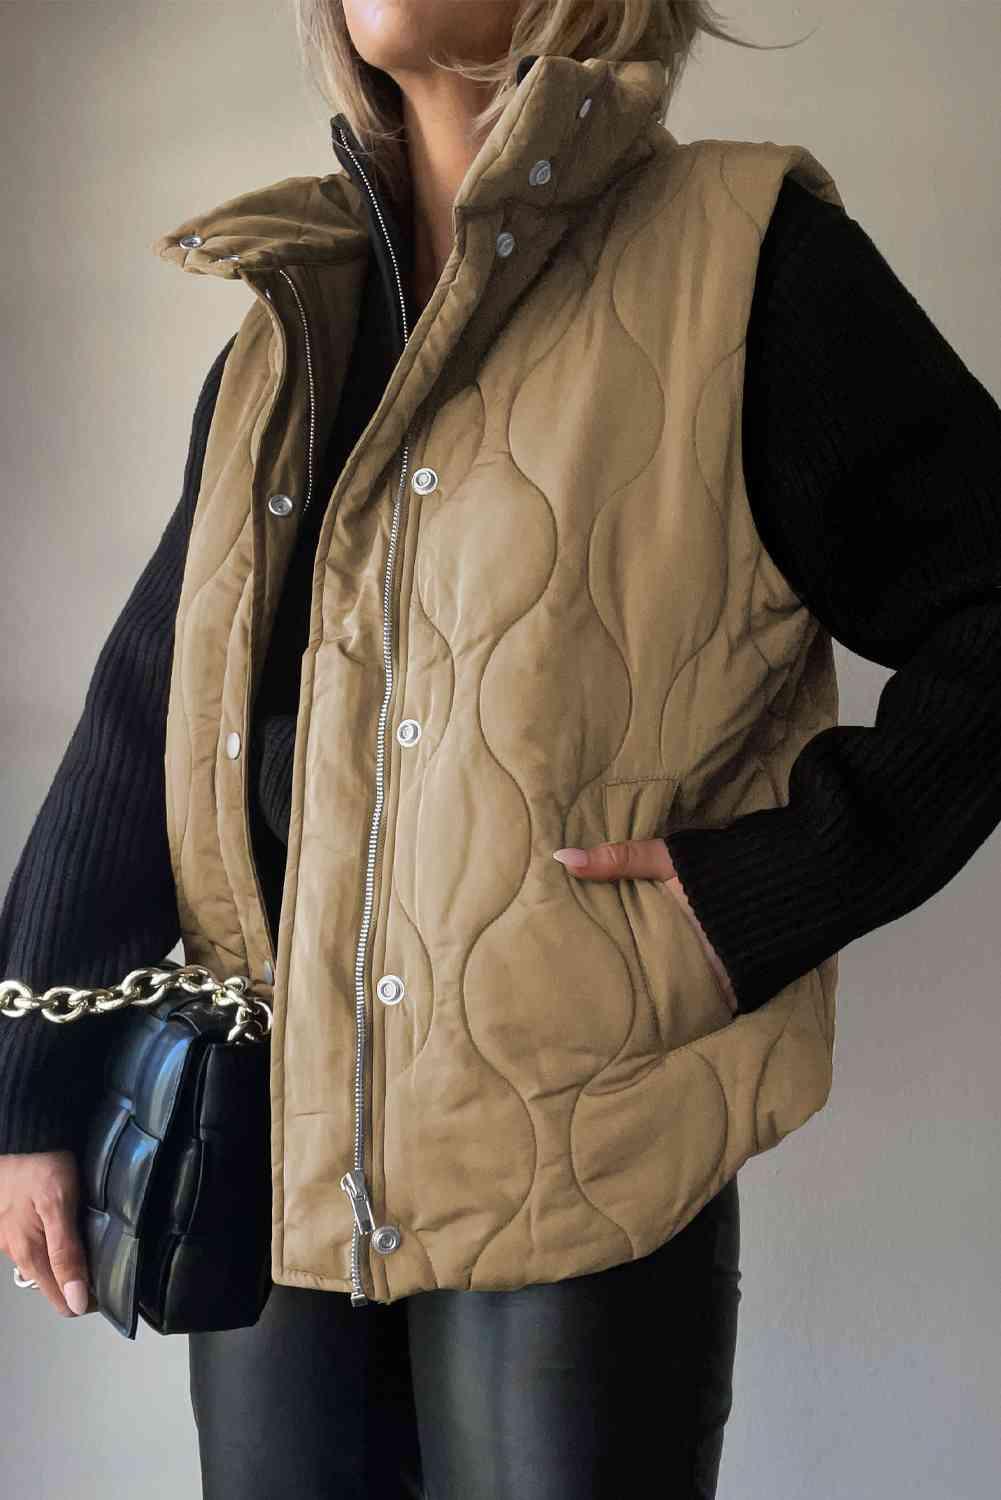 a woman wearing a tan quilted vest and black pants